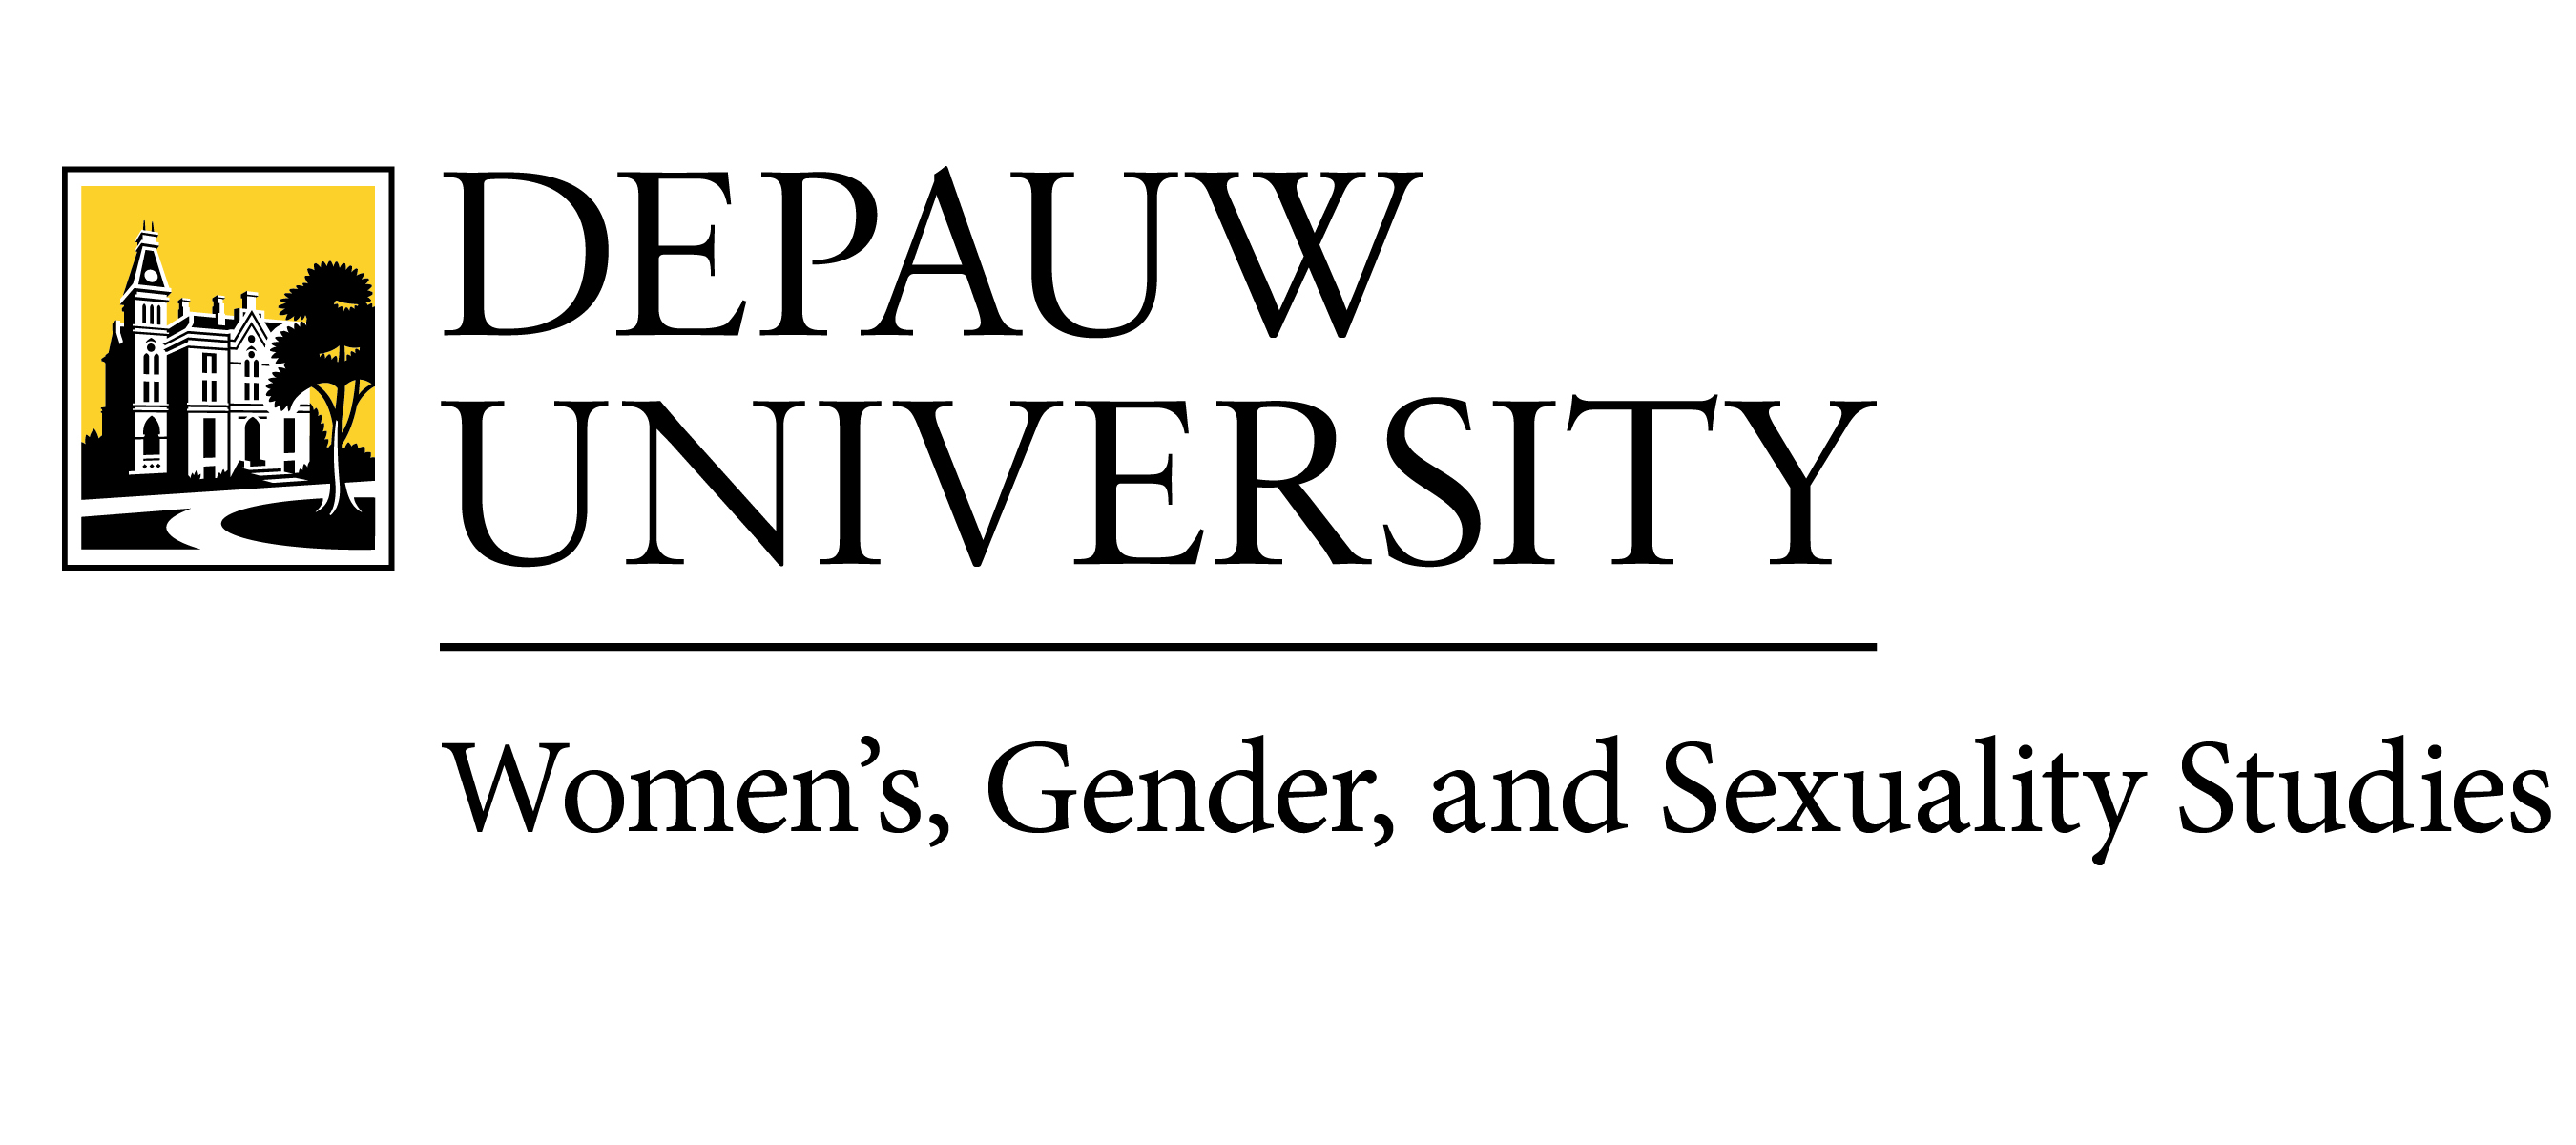 Women’s, Gender, and Sexuality Studies